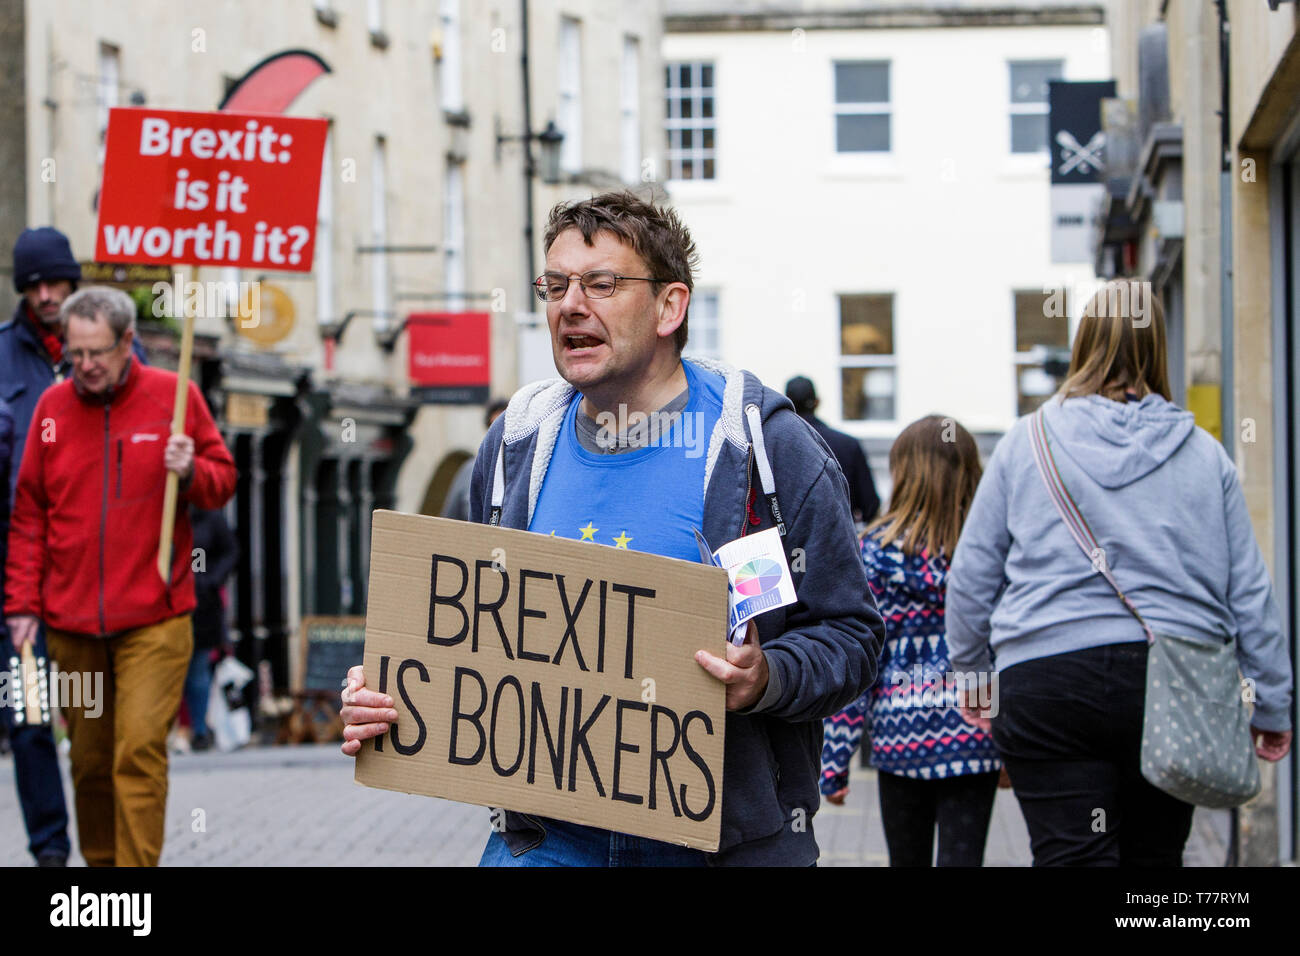 Bath, Somerset, UK, 5th May, 2019. A member from the Bath for Europe group is pictured holding an anti-brexit sign as he takes part in a protest march through the streets of Bath. Bath for Europe are a non-party-political group of volunteers campaigning for the UK to remain at the heart of the European Union, they are also campaigning for a People’s Vote on the final Brexit deal. Credit: Lynchpics/Alamy Live News Stock Photo